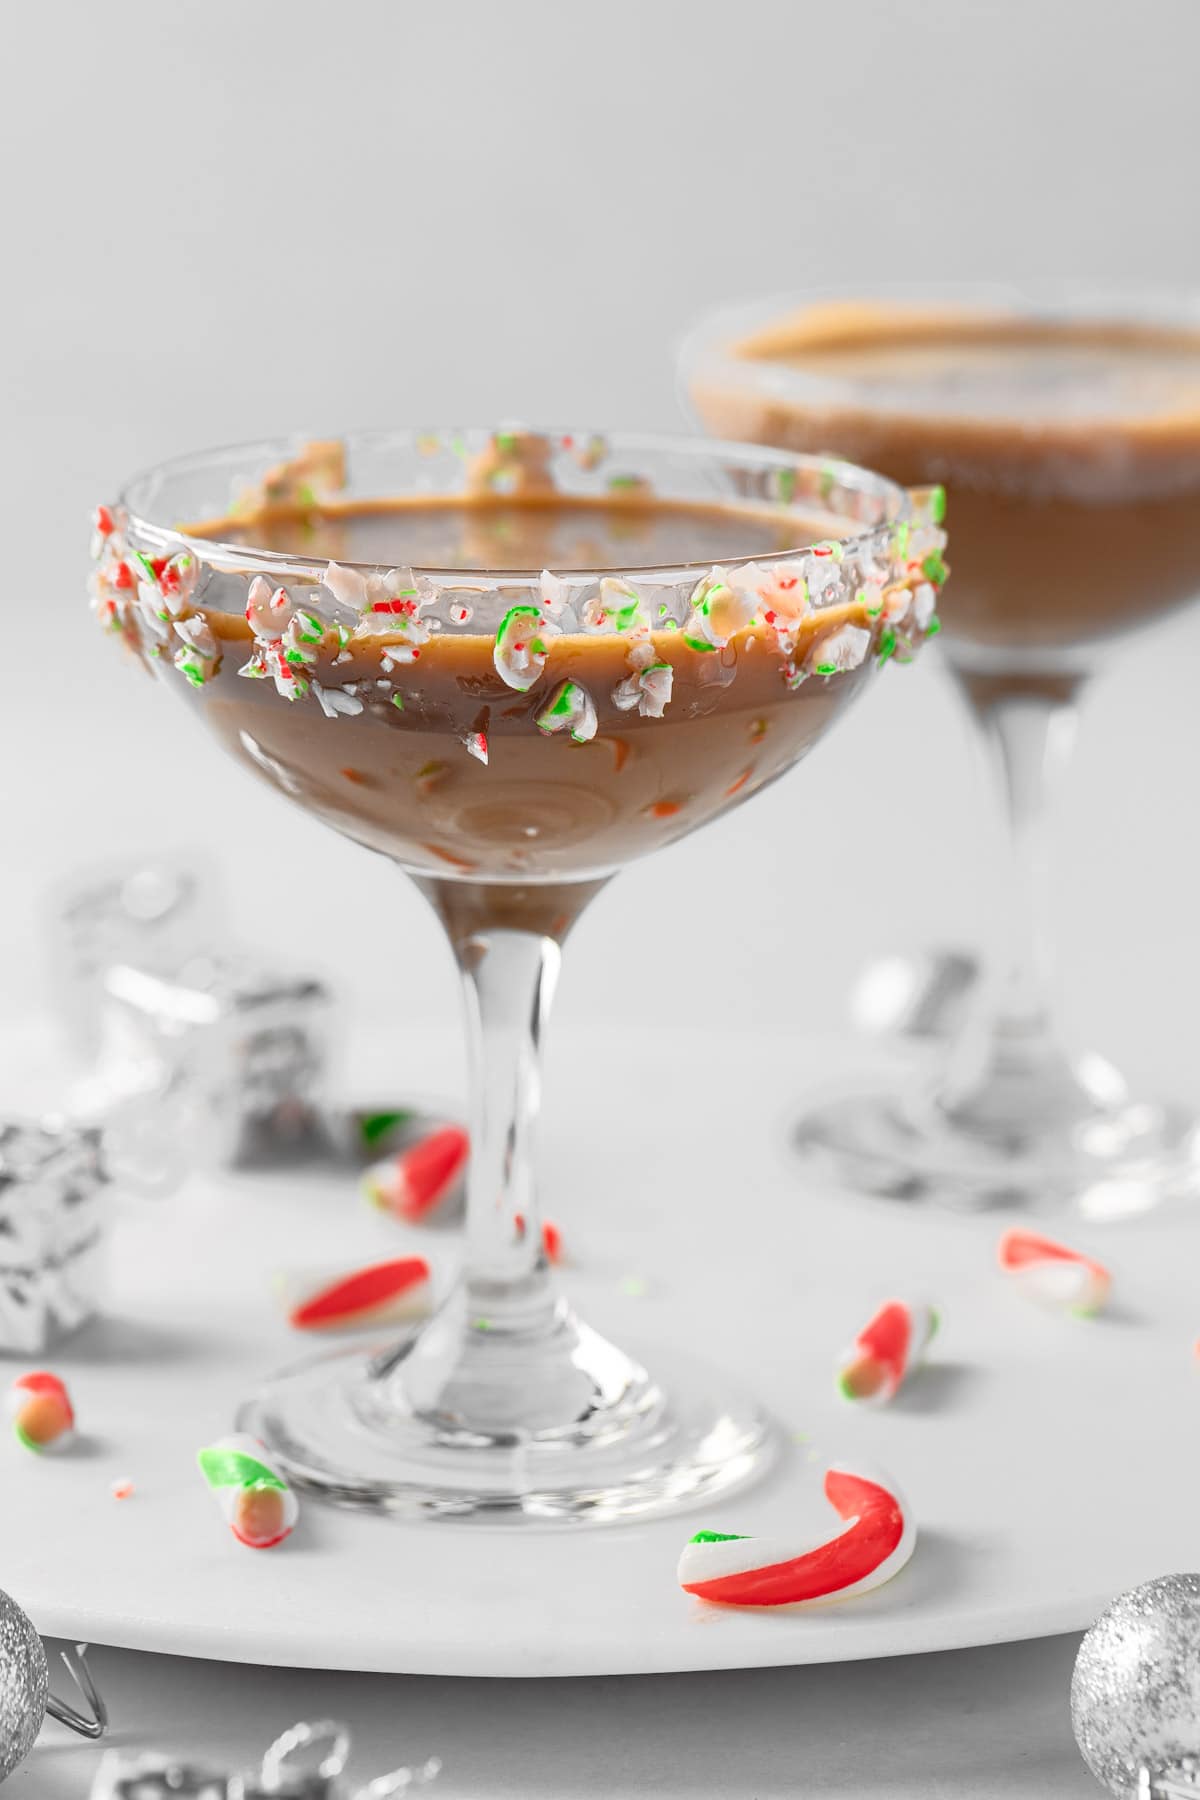 A a couple peppermint espresso martinis with a candy cane rim, next to scattered candy cane pieces.